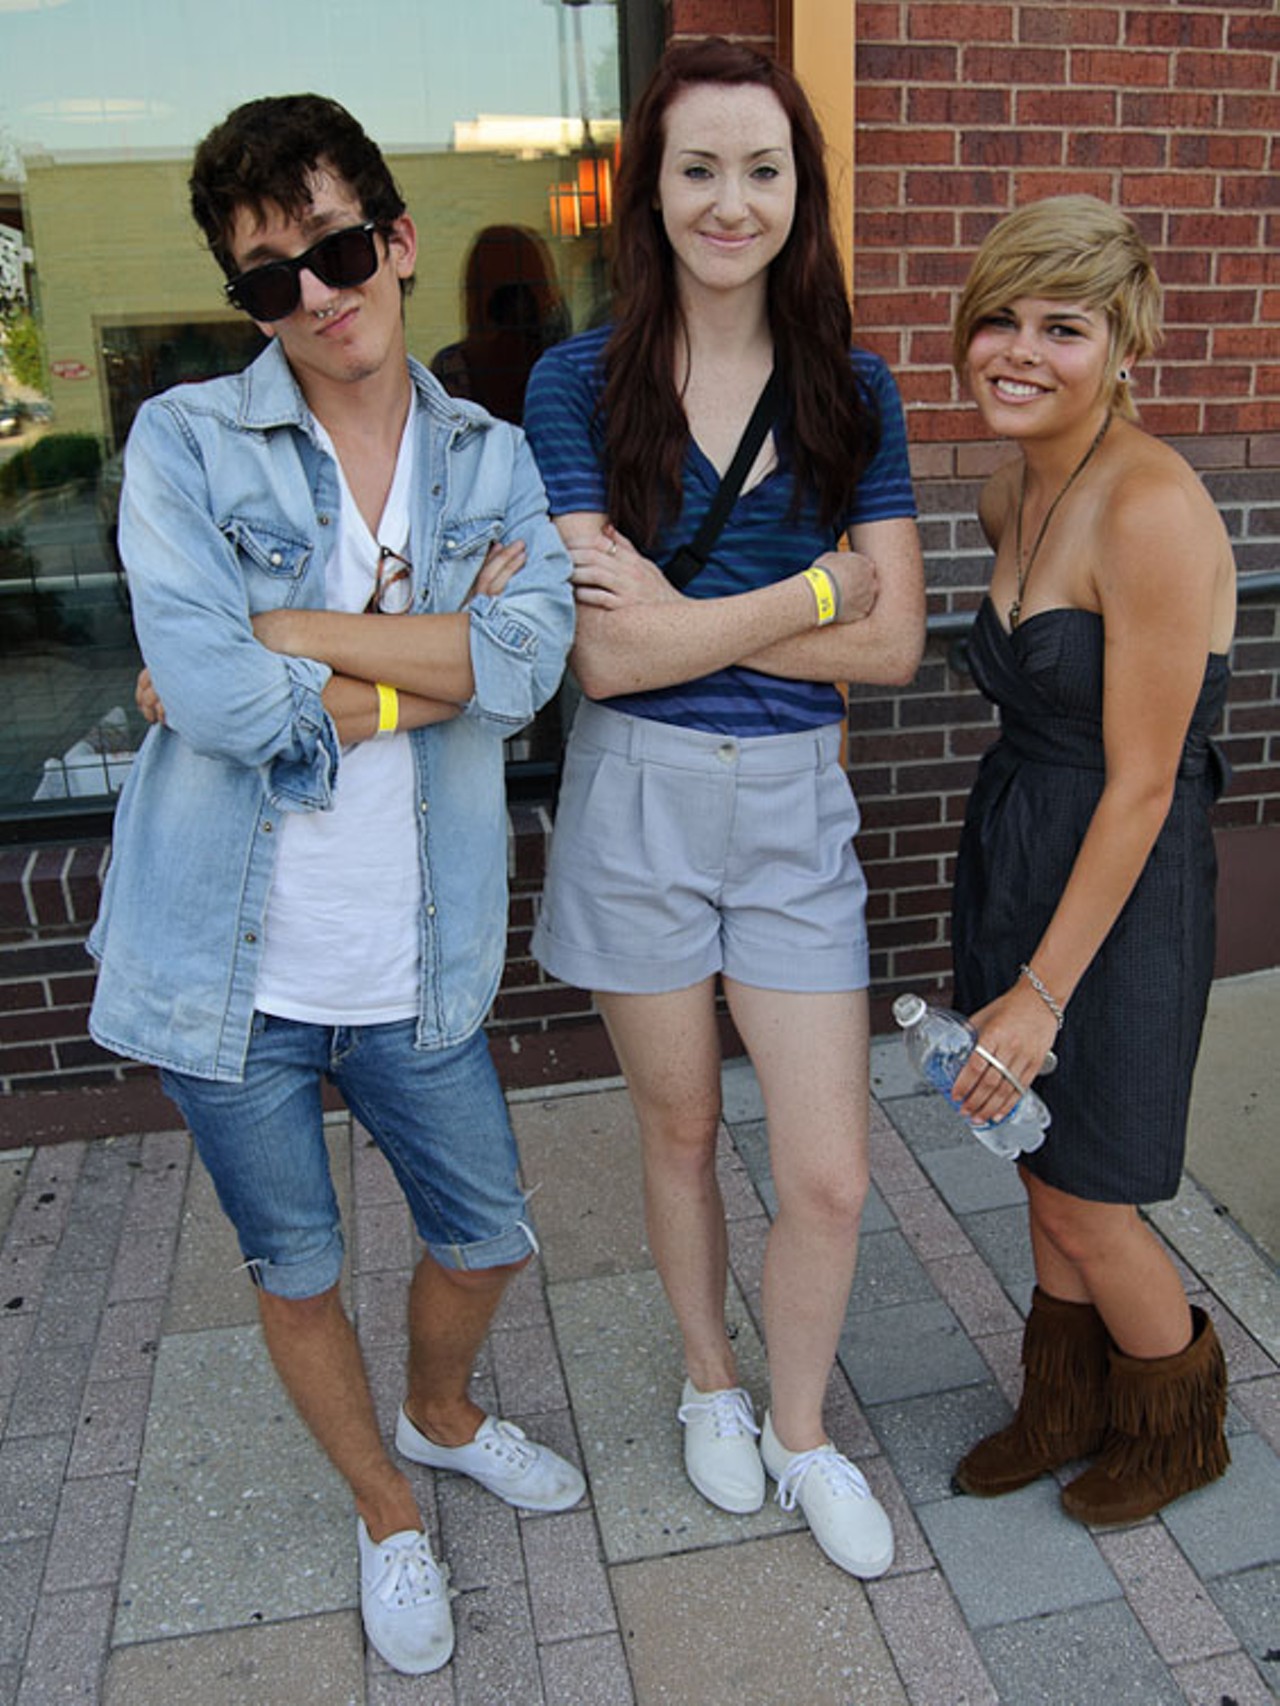 Alex Abbot, Lauren McCaskell, and Erika Carrico were in line at 5:30 - and drove in from Washington.